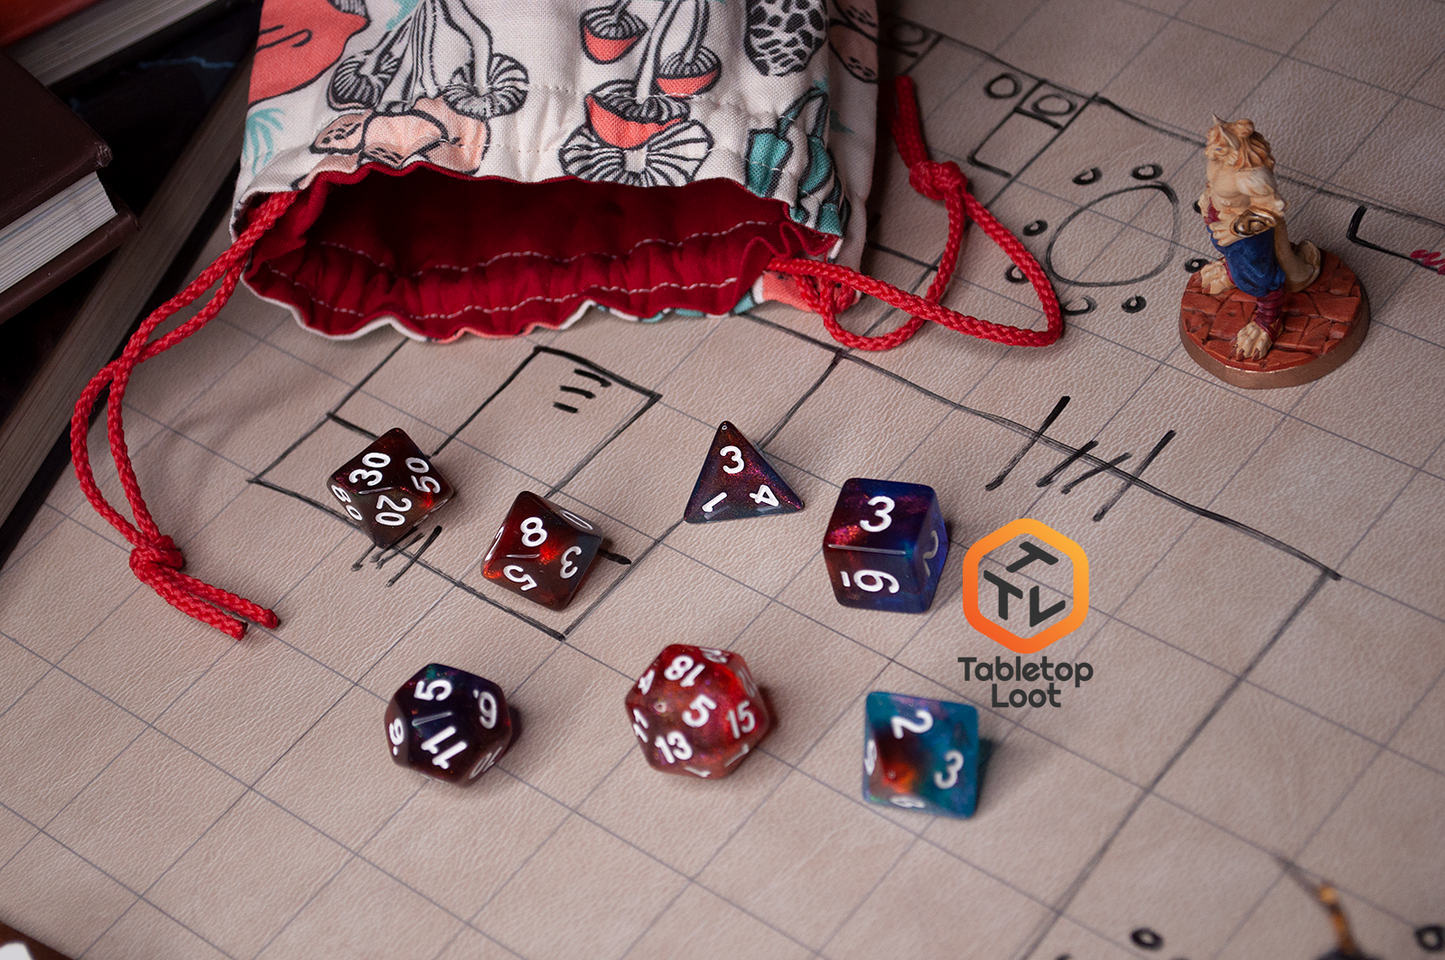 The Interstellar 7 piece dice set from Tabletop Loot with swirling shades of shimmery red and blue resin and white numbering.